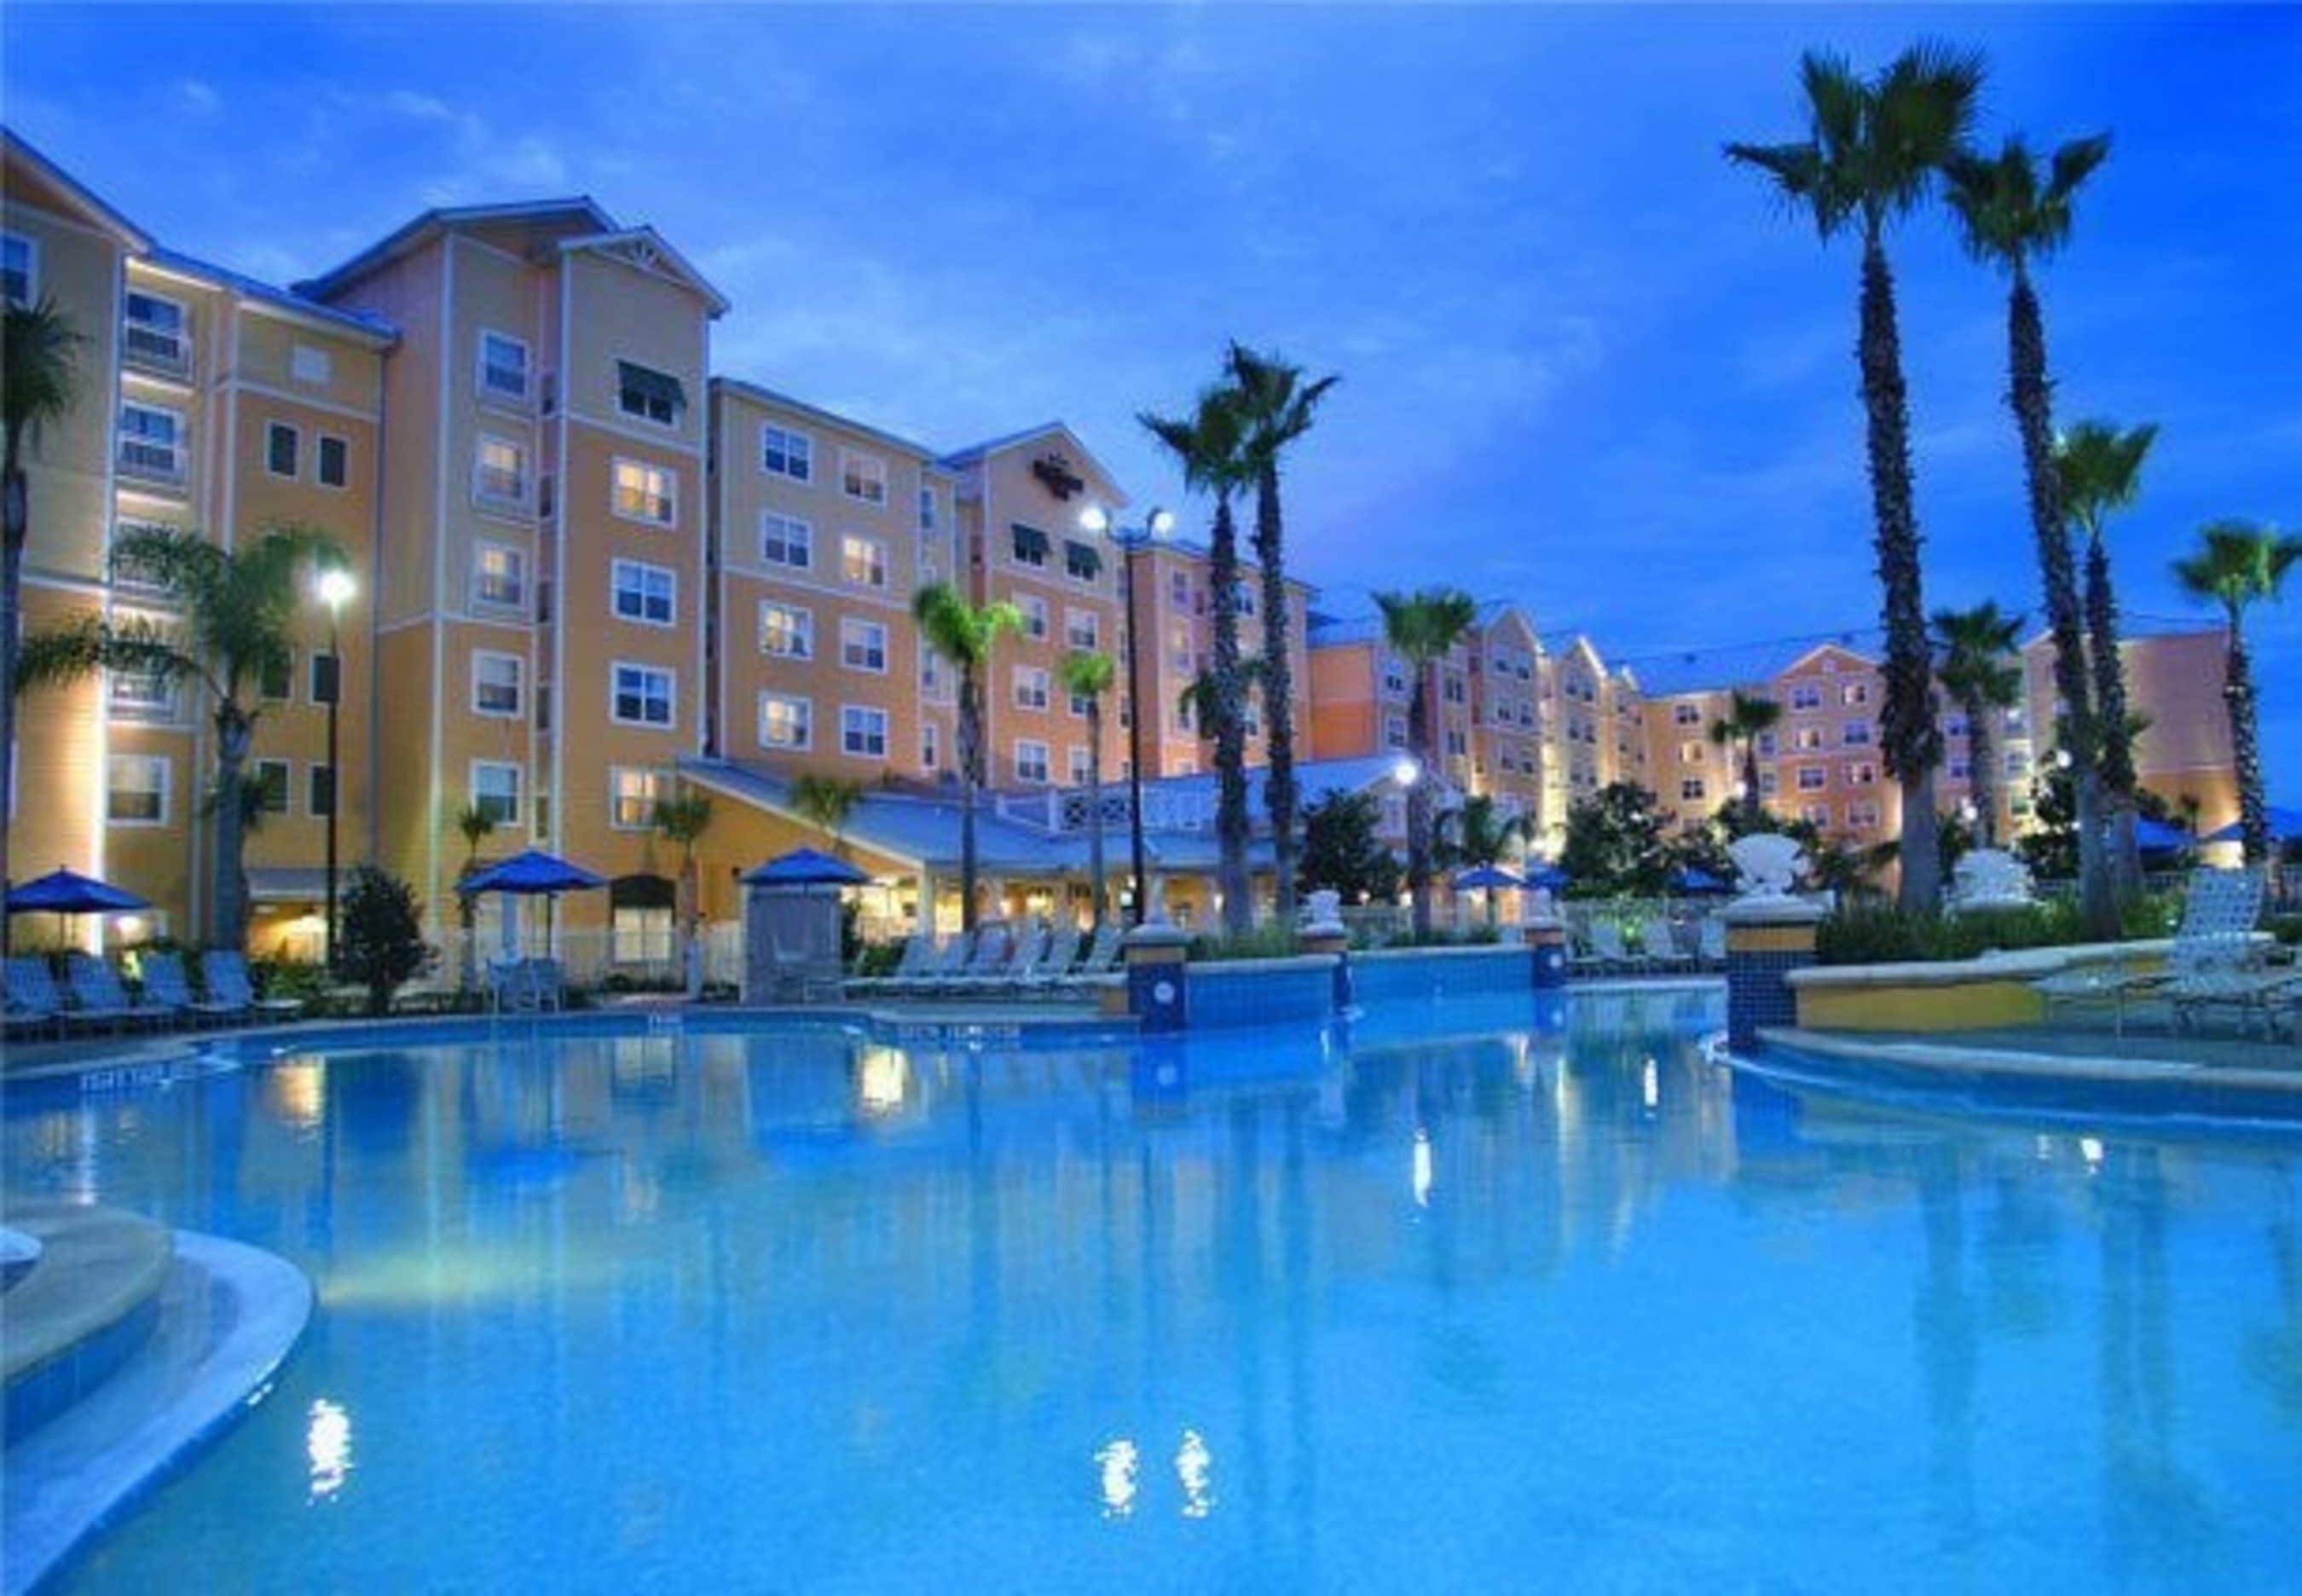 Just in time for end-of-summer getaways, Residence Inn Orlando at SeaWorld(R) has announced its Stay 5 Nights Package. Guests who take advantage of this limited-time offer will enjoy 20 percent off of their entire stay of five or more consecutive nights. The extended-stay hotel is an official SeaWorld(R) partner and offers free transportation to and from the theme park as well as complimentary front-of-the-line passes and exclusive discounts at park restaurants and retailers. For information, visit www.ResidenceInnSeaWorld.com or call 1-407-313-3600.